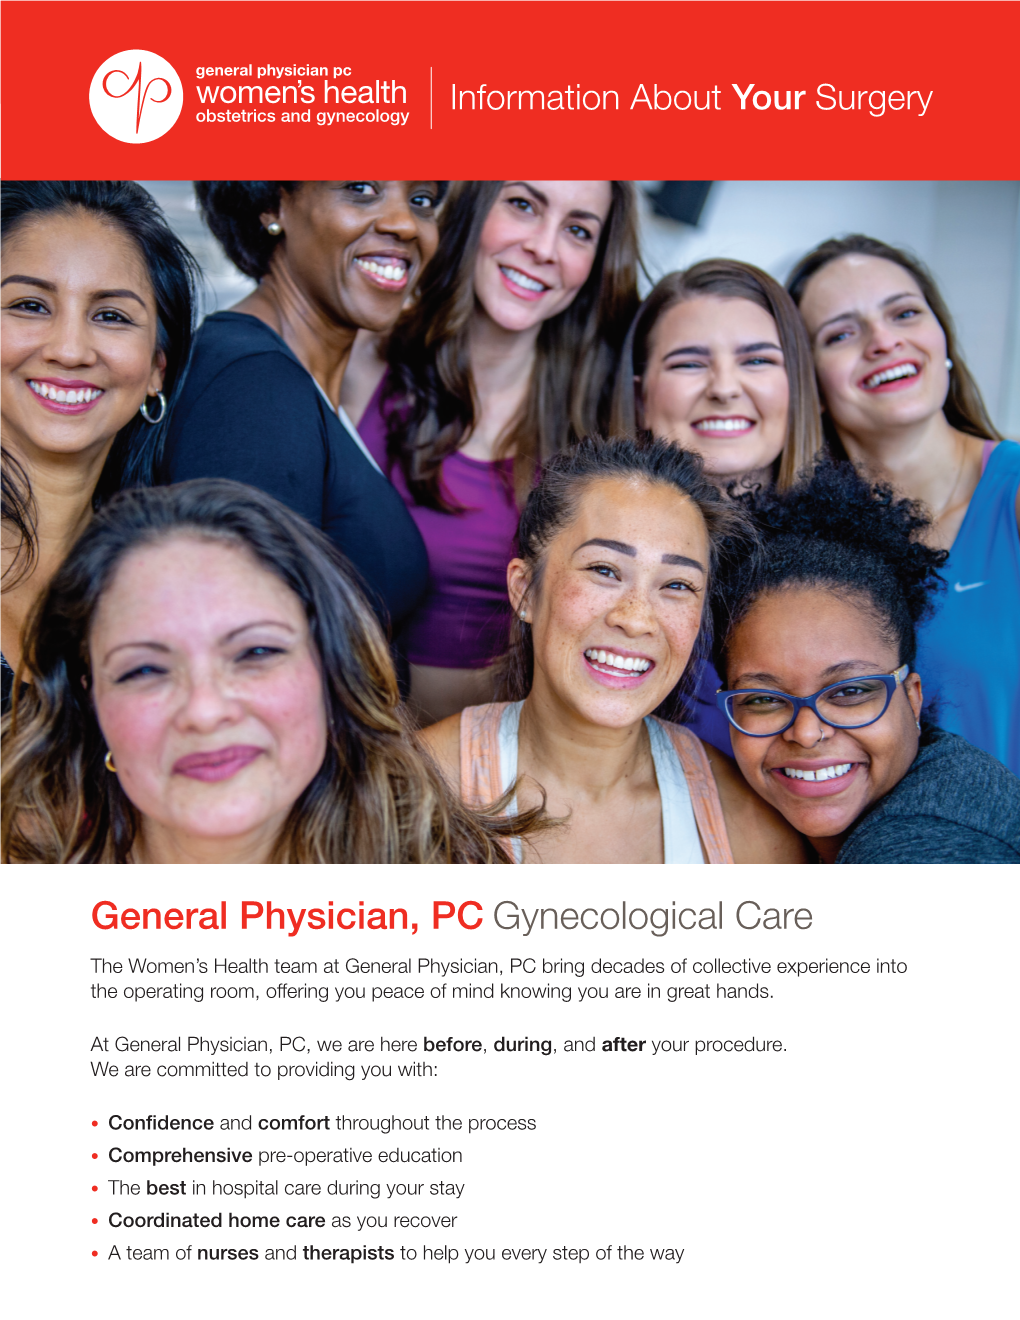 General Physician, PC Gynecological Care